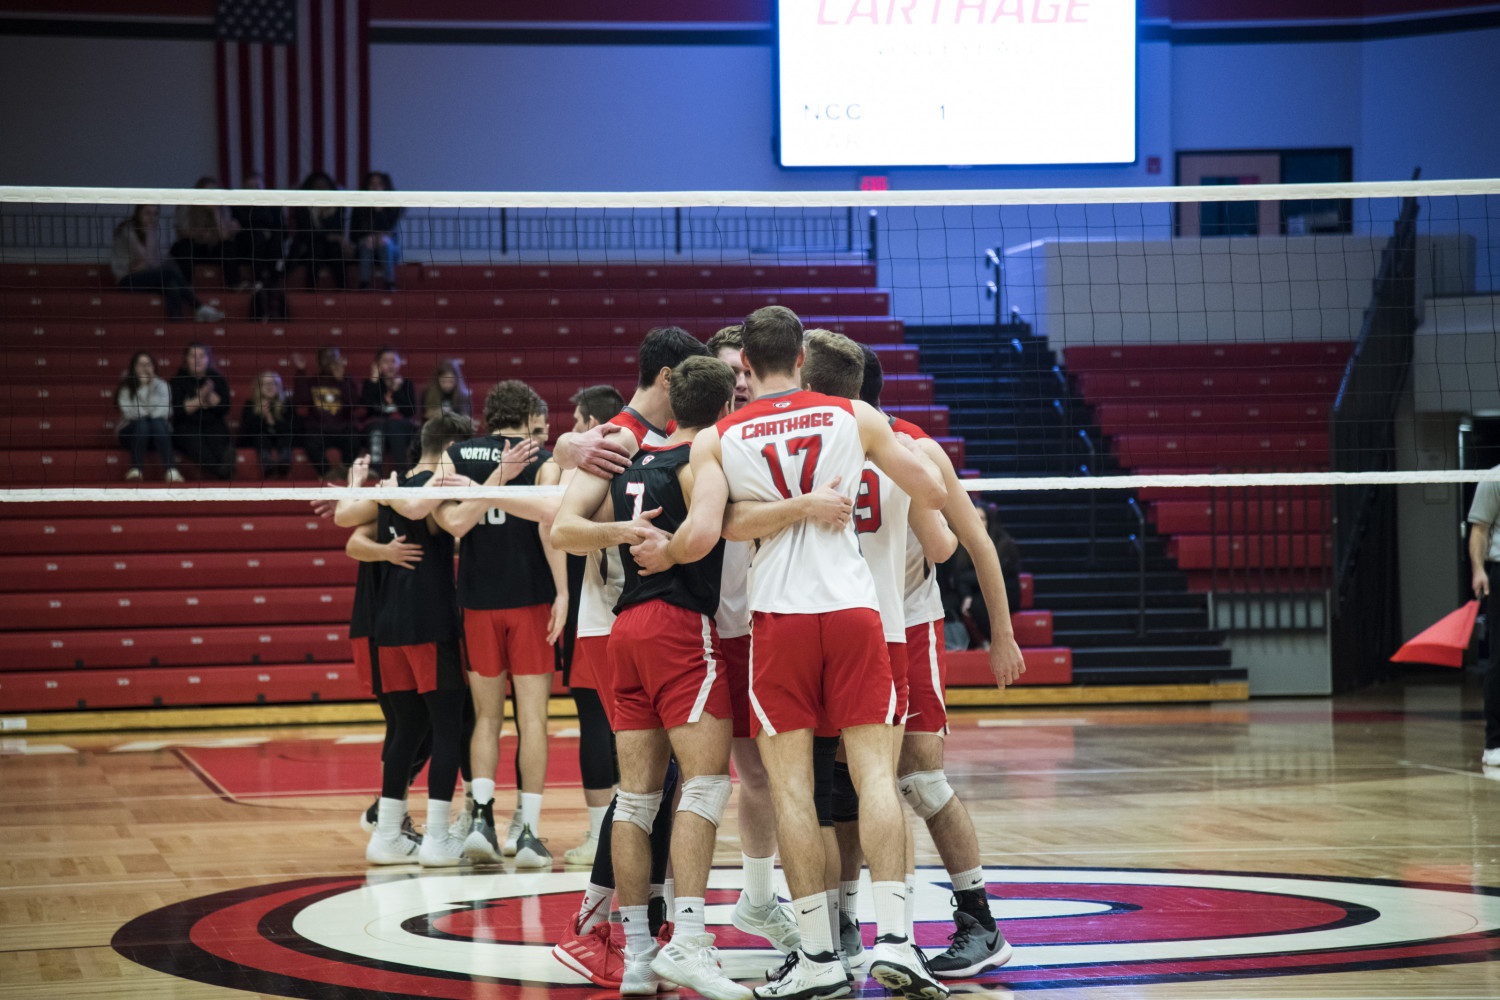 The Carthage Men?s Volleyball team won the NCAA championship in 2021.